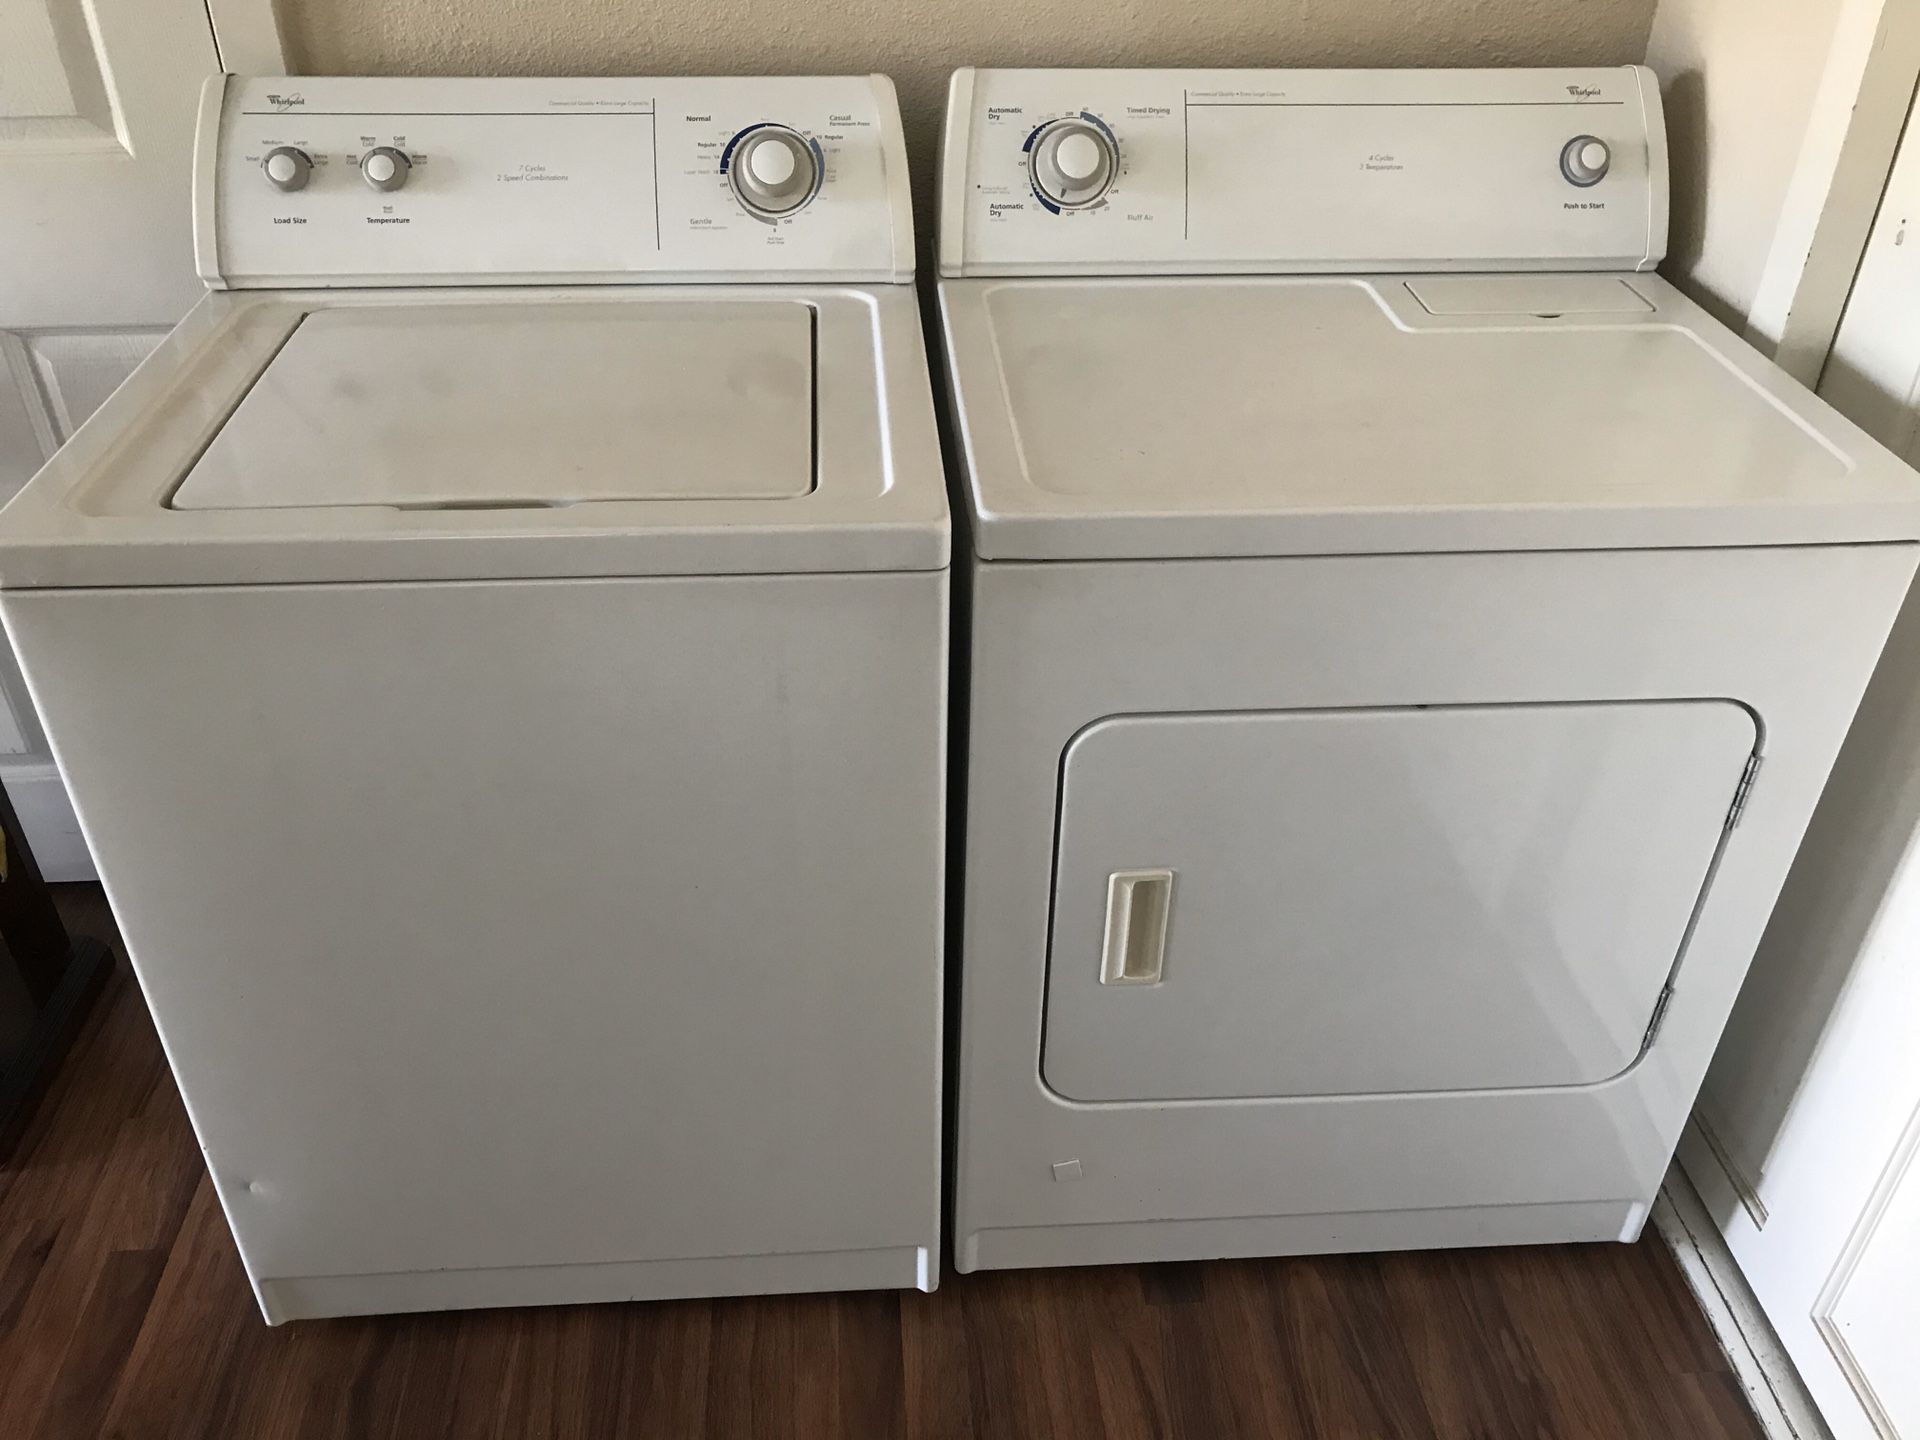 🔥whirlpool🔥 Washer and gas dryer set